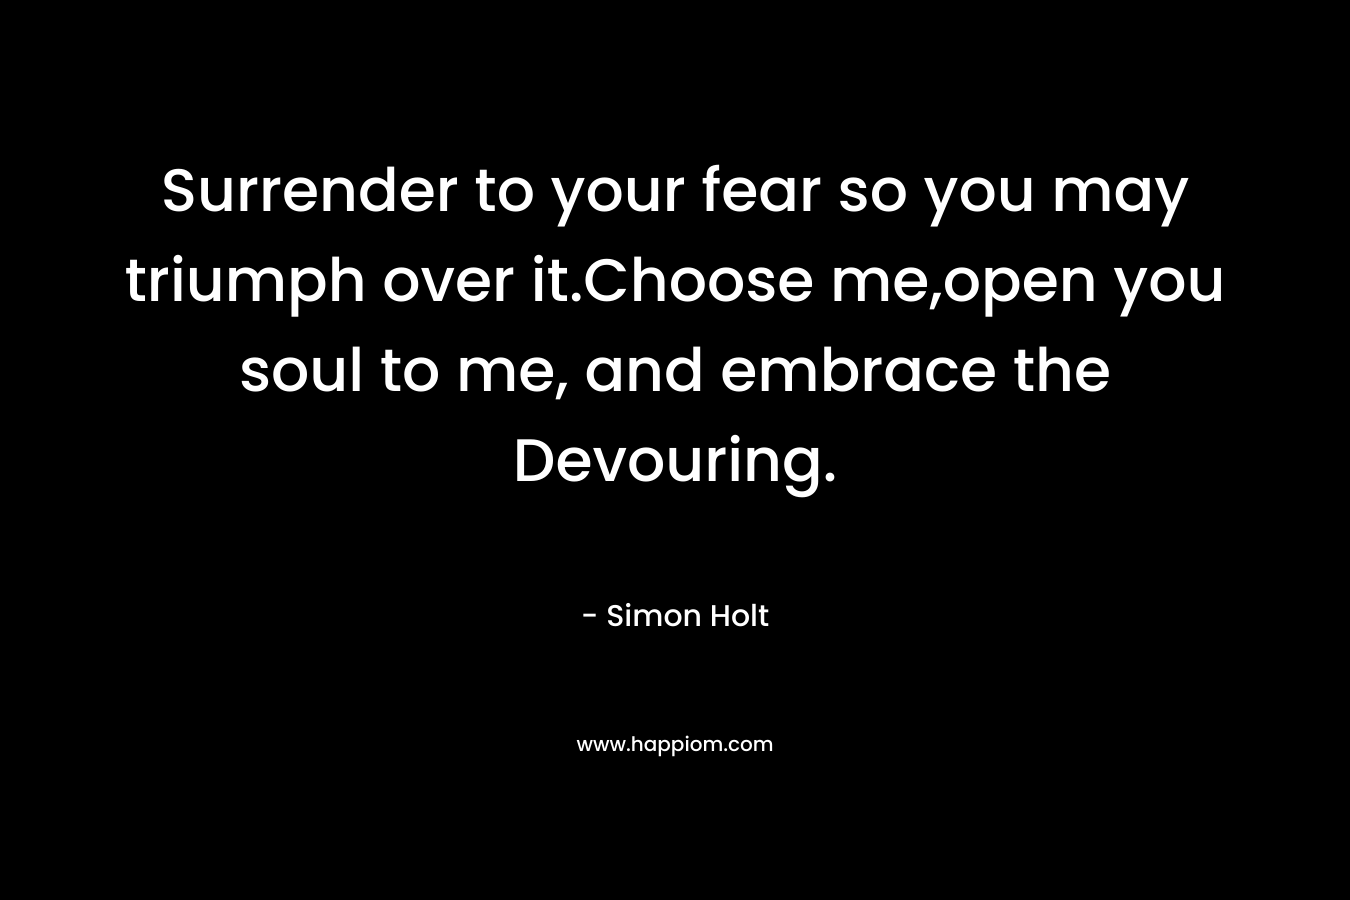 Surrender to your fear so you may triumph over it.Choose me,open you soul to me, and embrace the Devouring. – Simon Holt